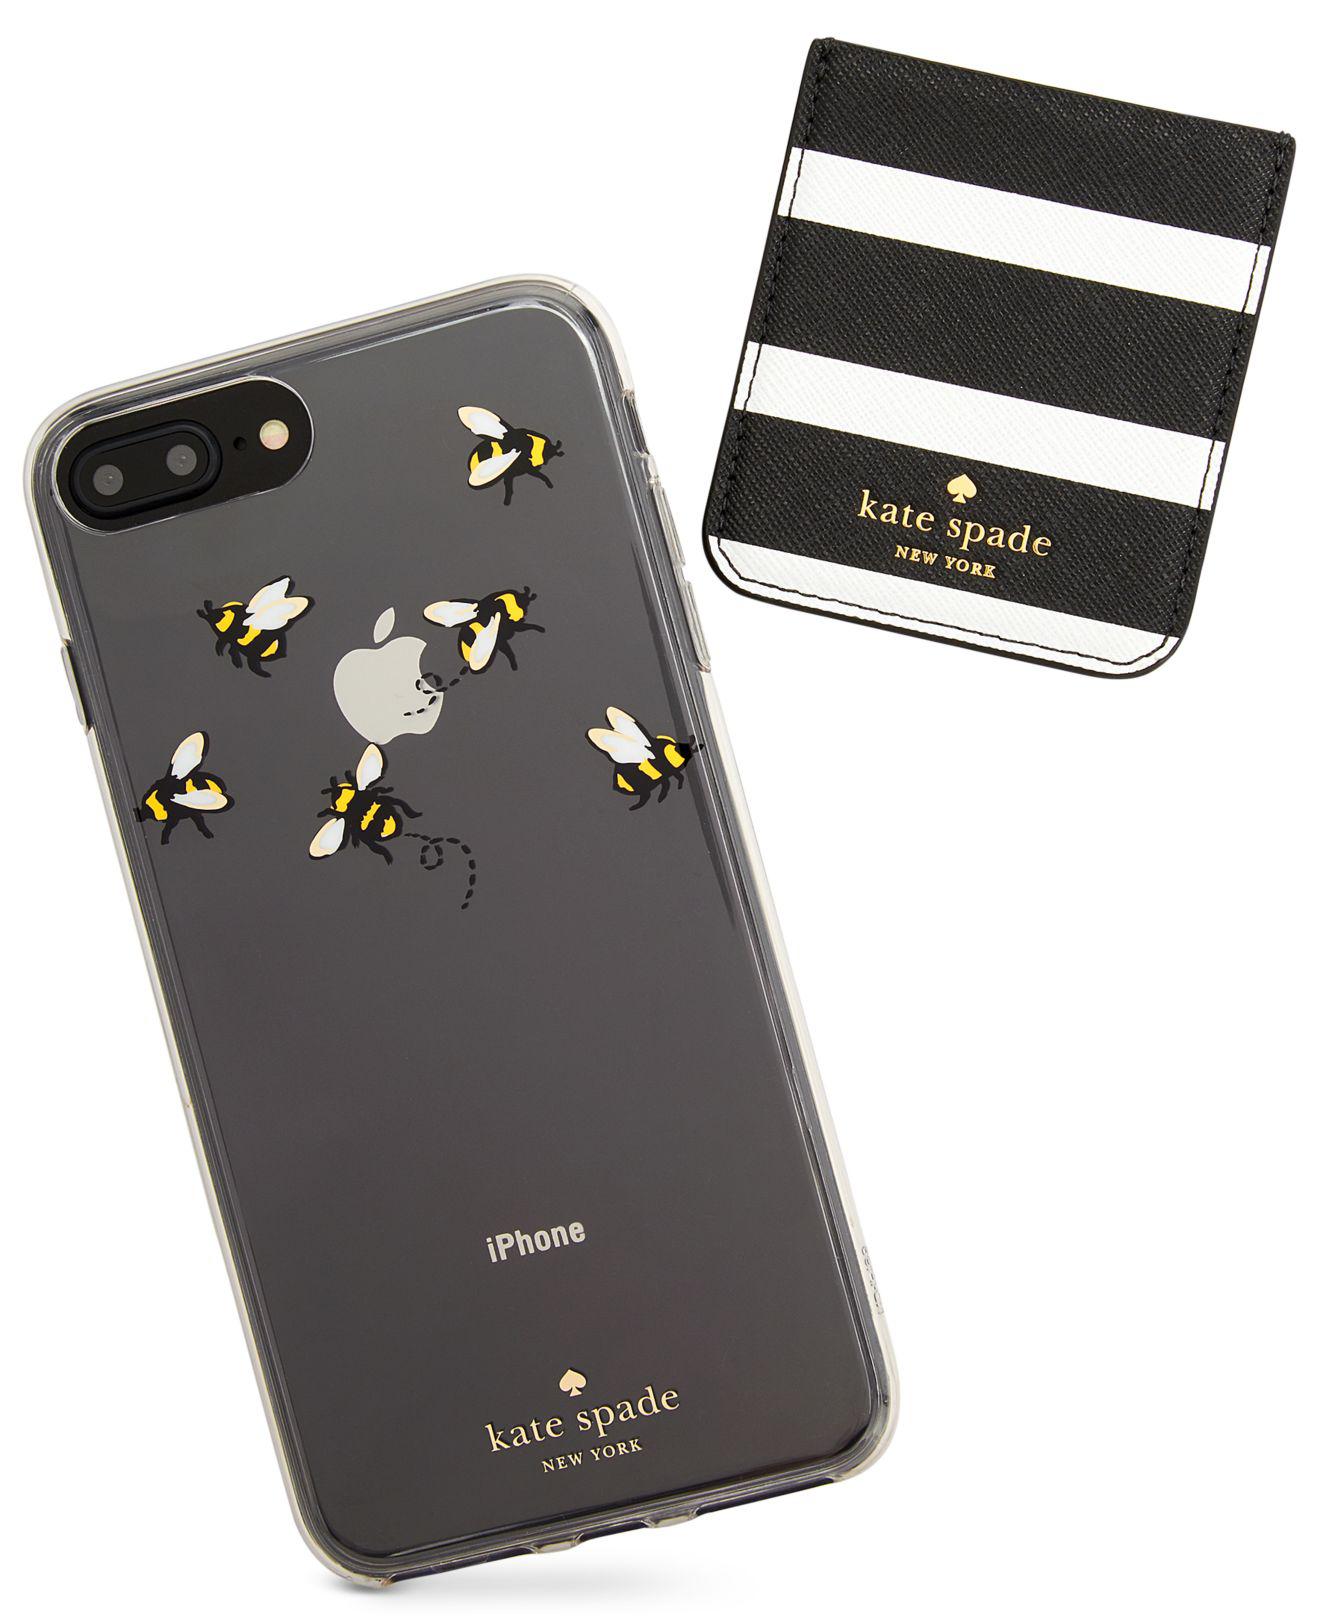 Kate Spade Leather Stick To It Iphone 8 Plus Case in Black/White (Black